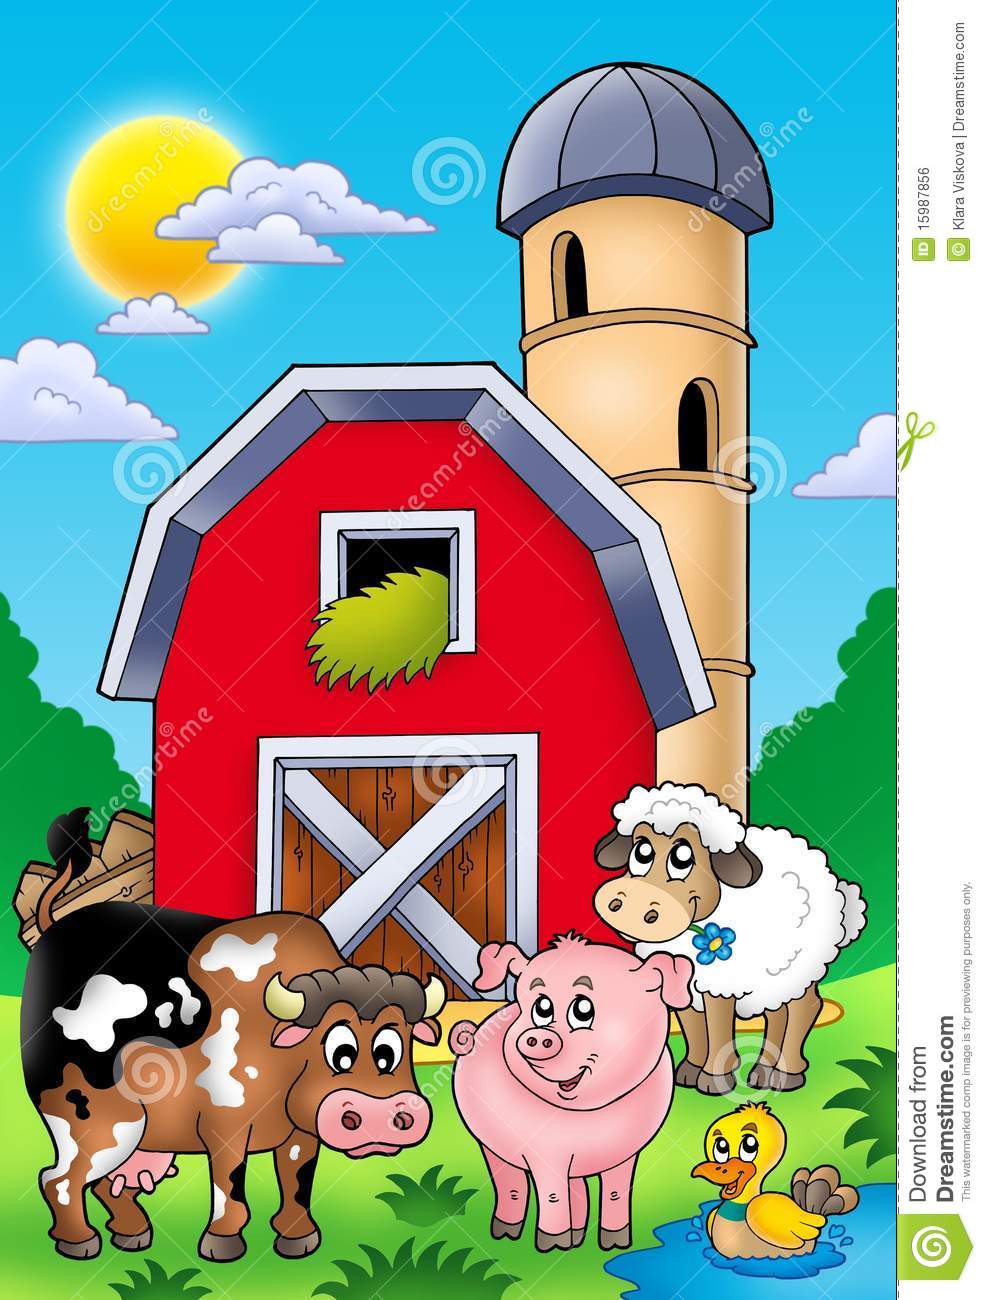 Big Red Barn With Farm Animals Royalty Free Stock Image   Image